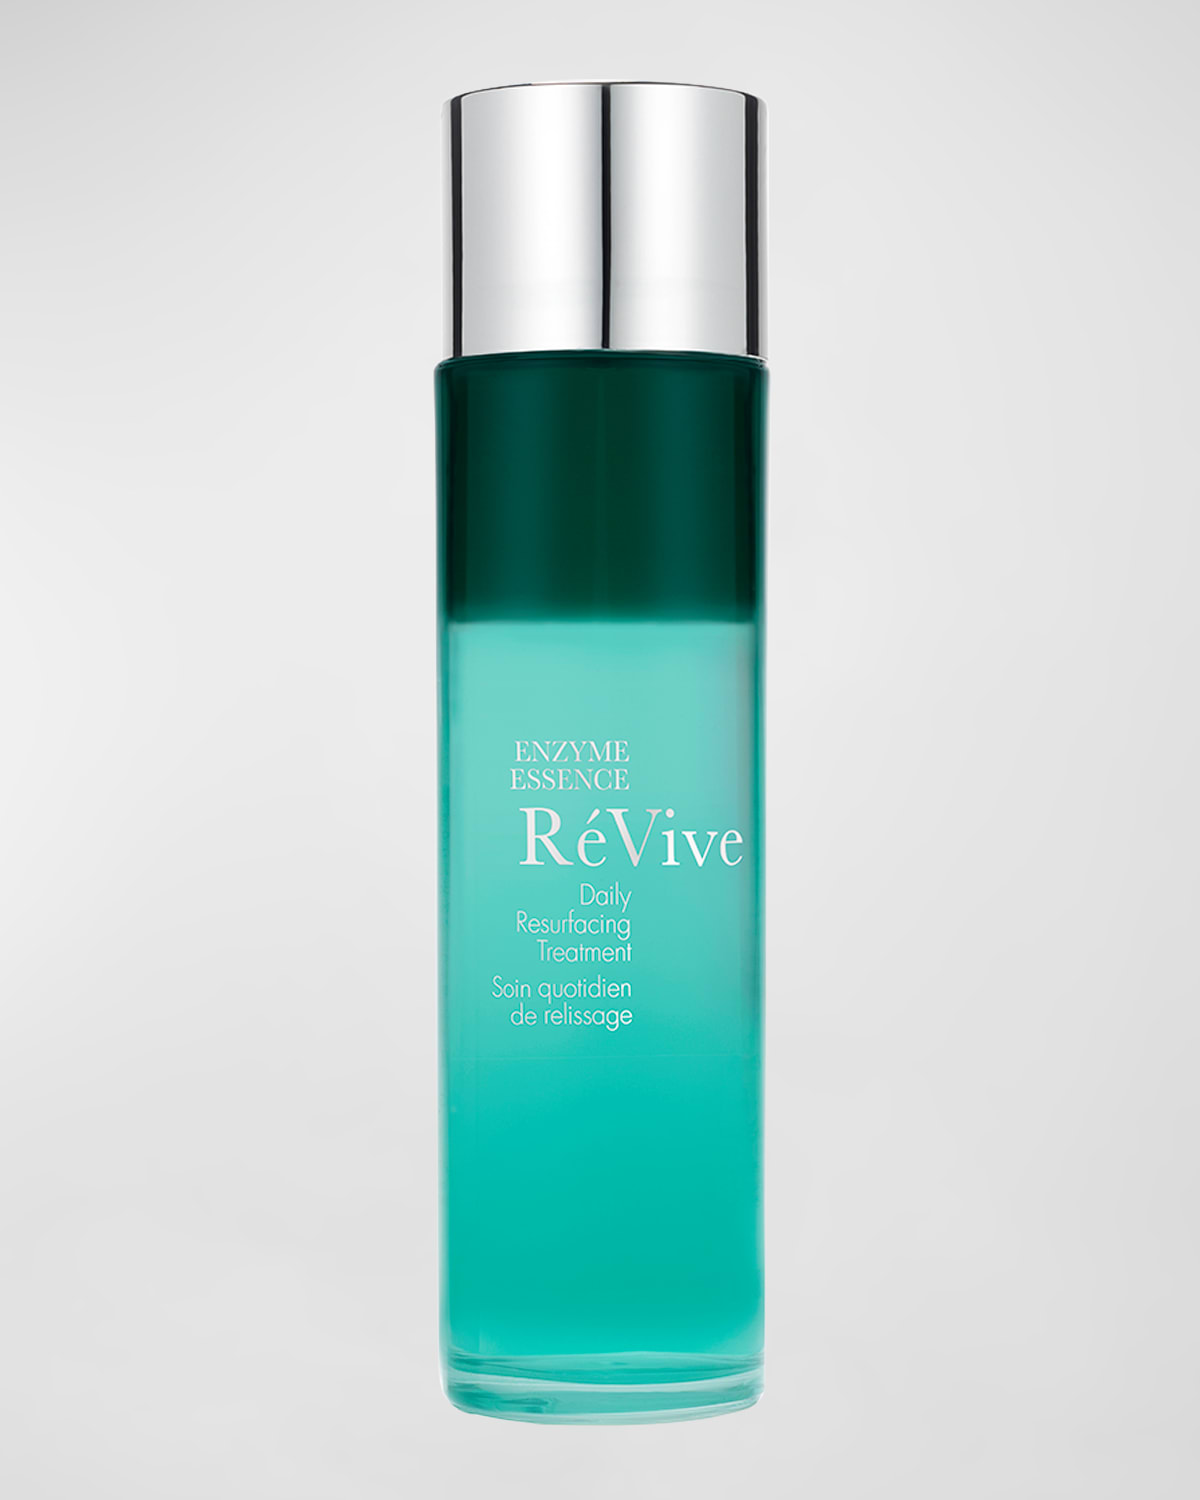 Shop Revive Enzyme Essence Daily Resurfacing Treatment